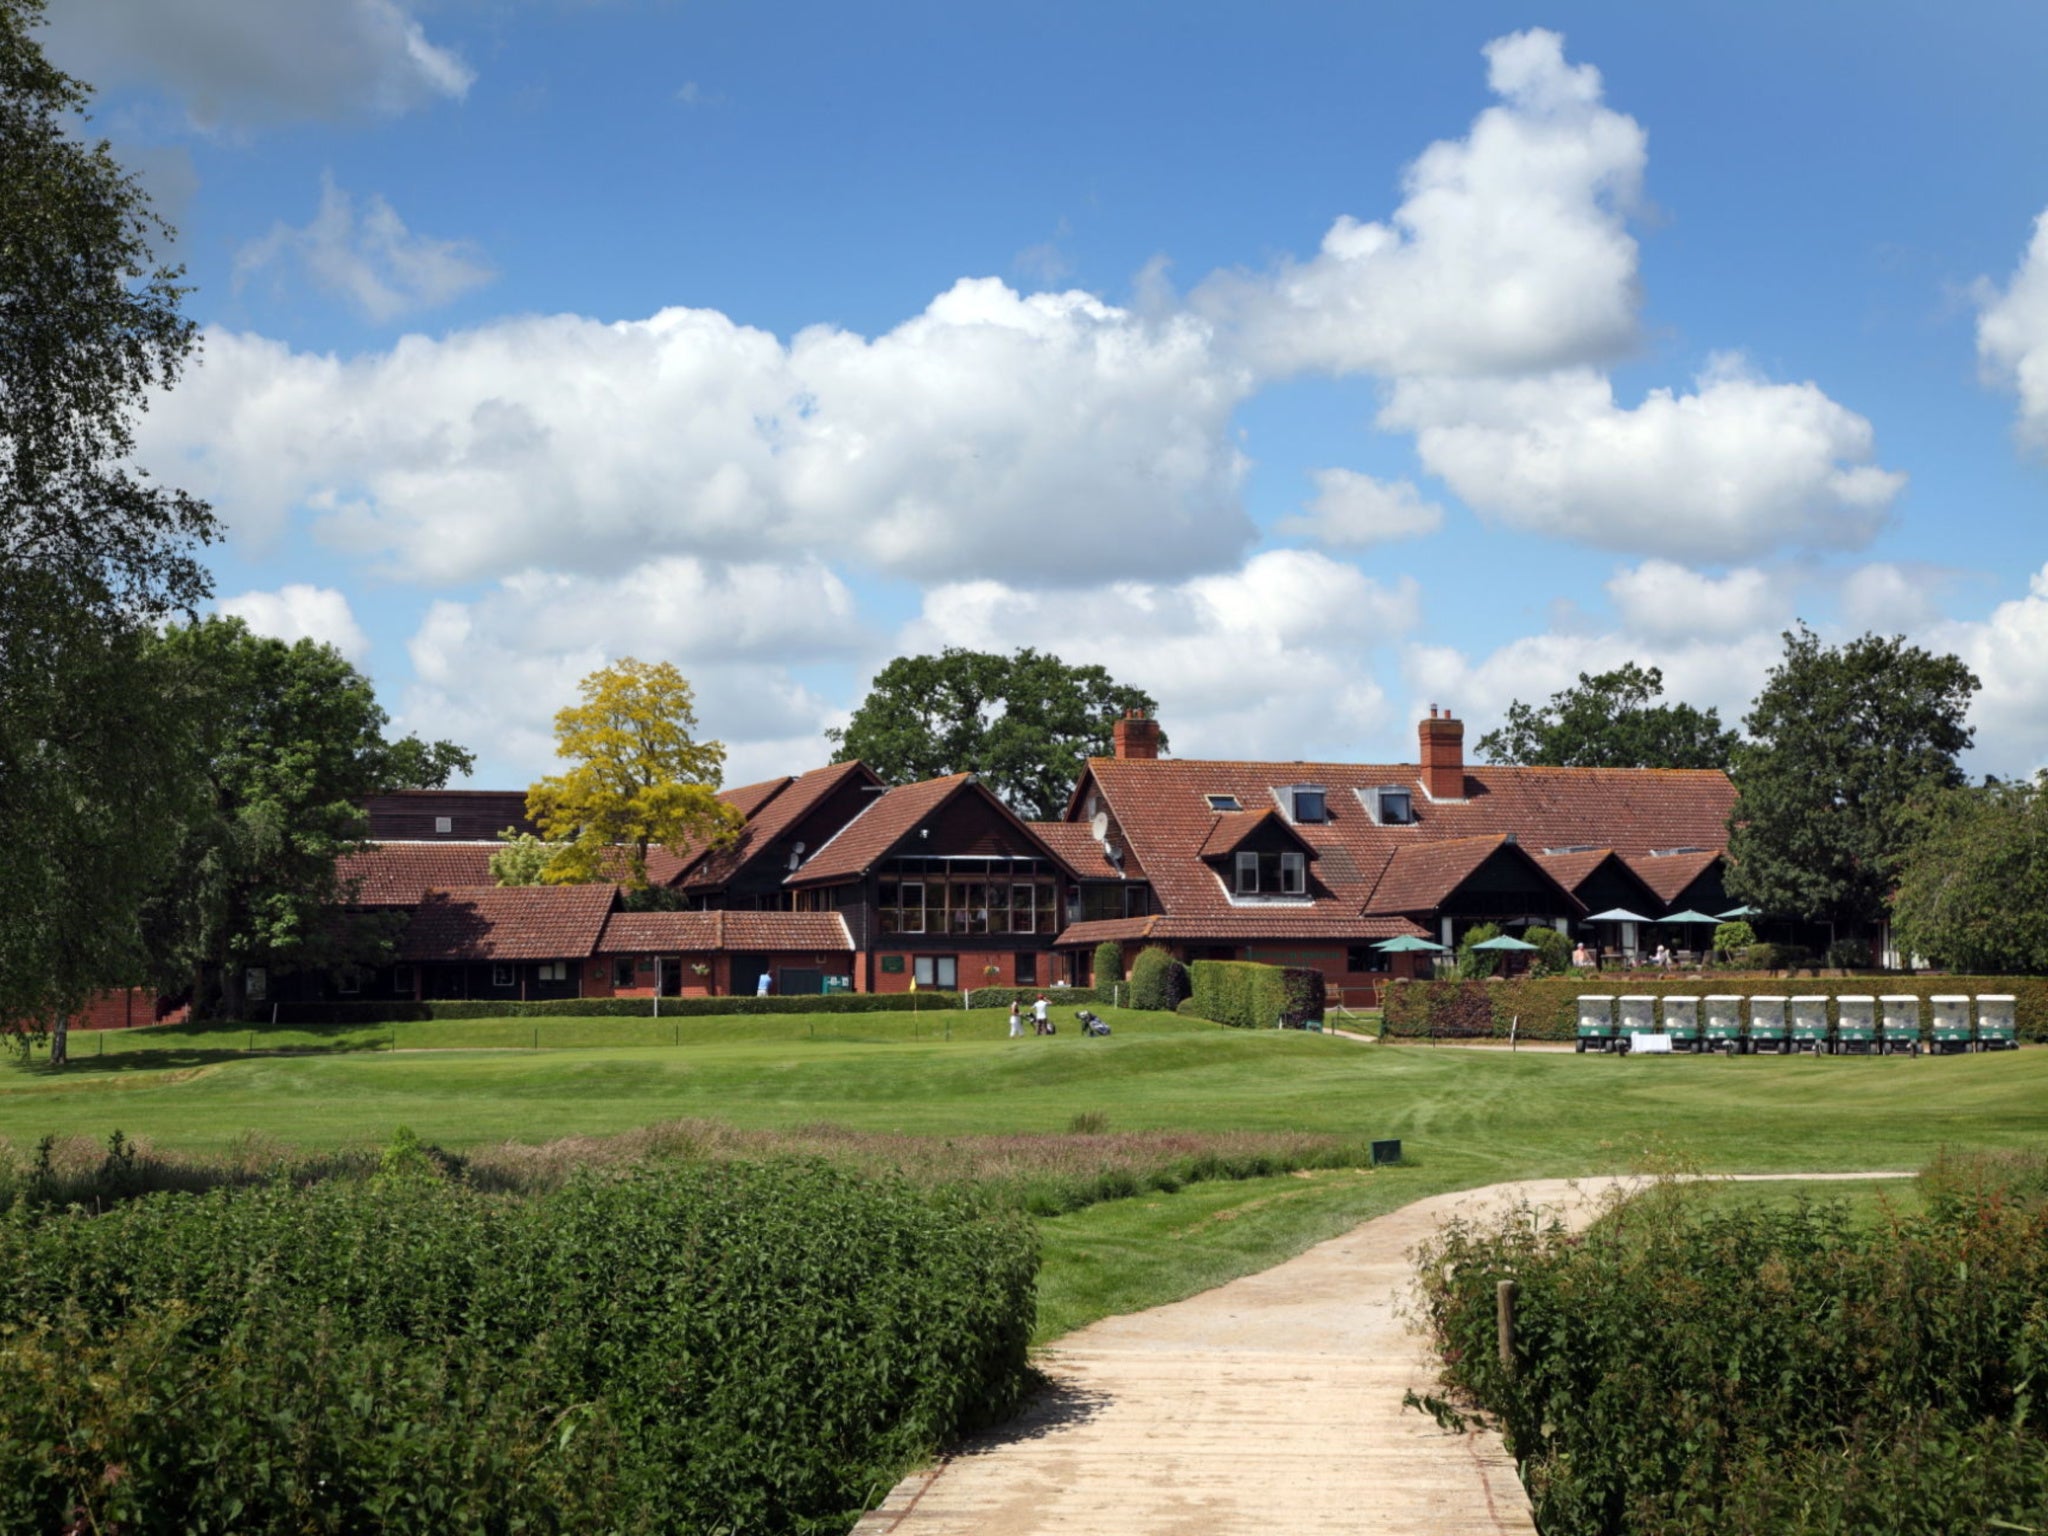 There are two golf courses at this hotel, which is a 20-minute drive from Norwich